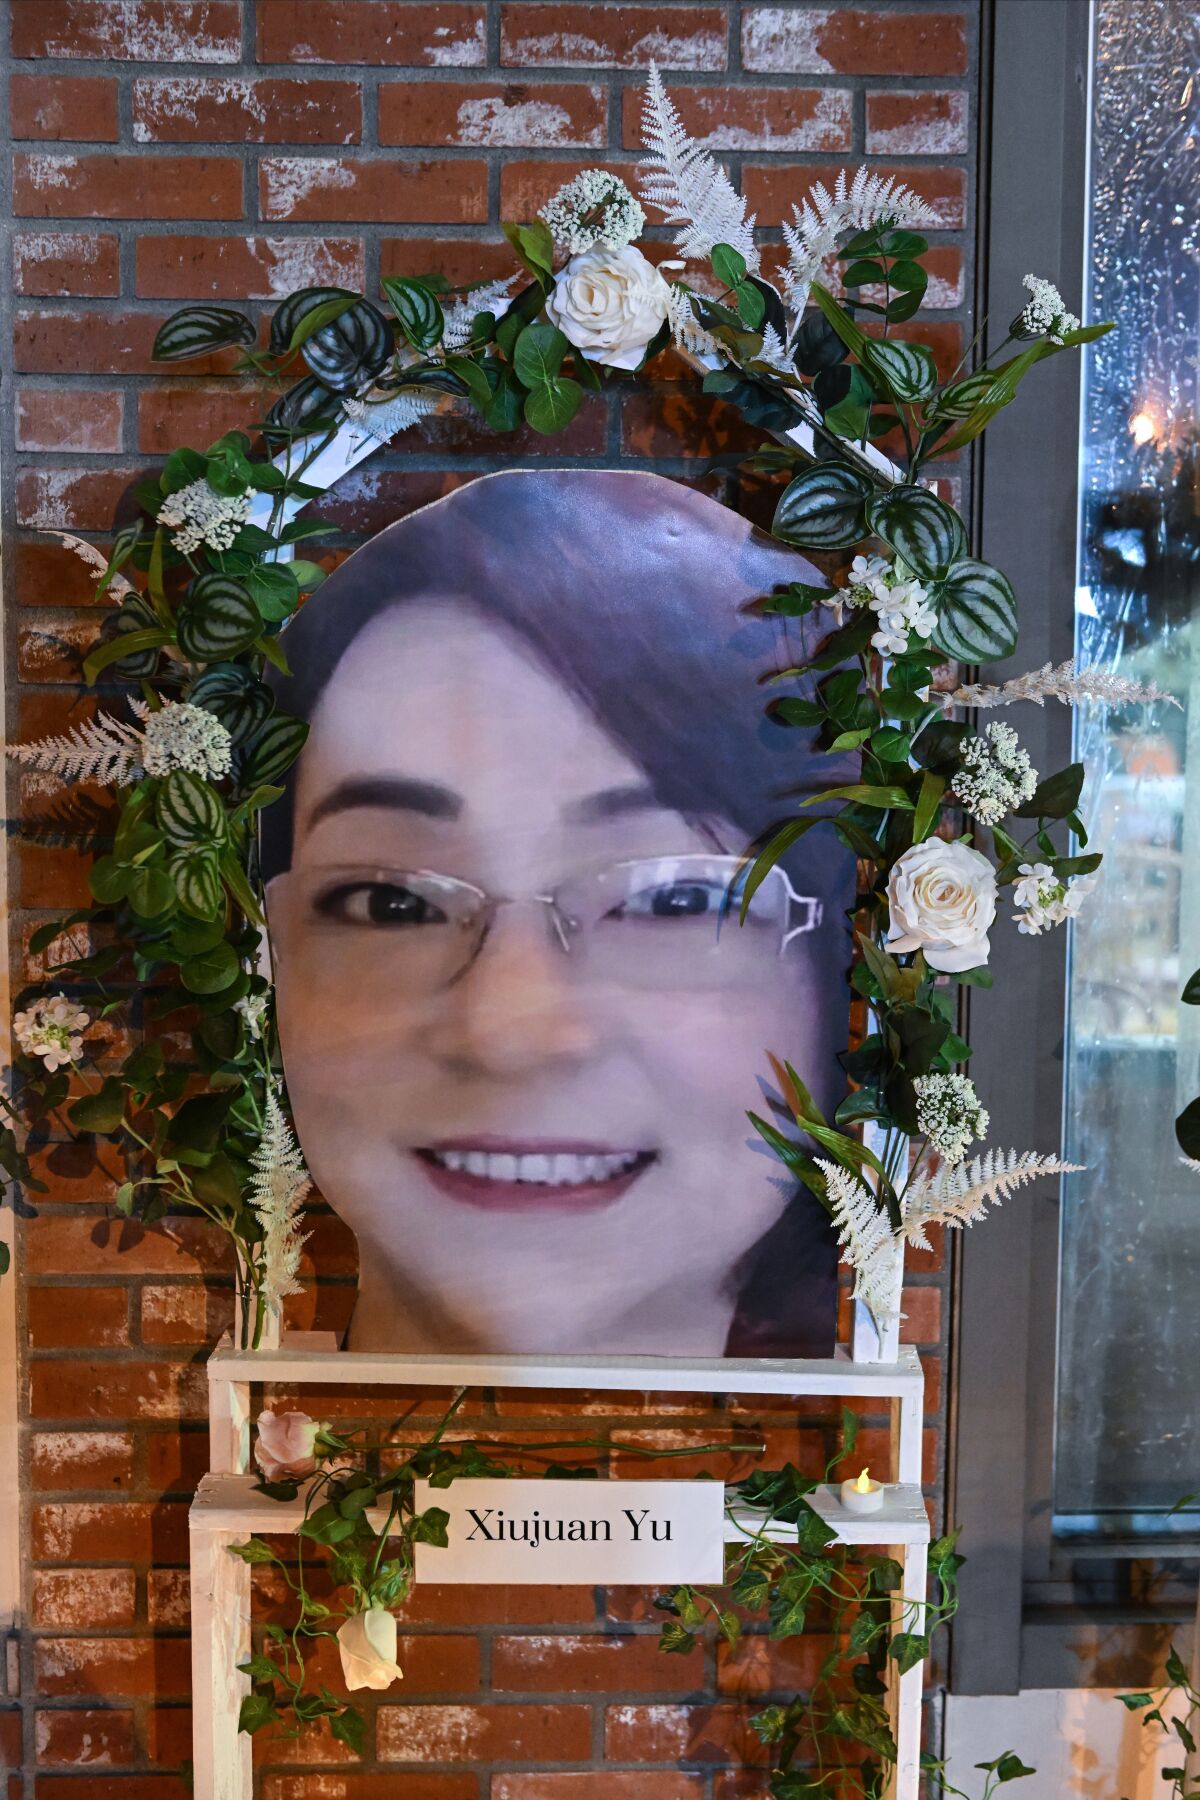 Flowers surround a large portrait of a smiling woman mounted on a brick wall